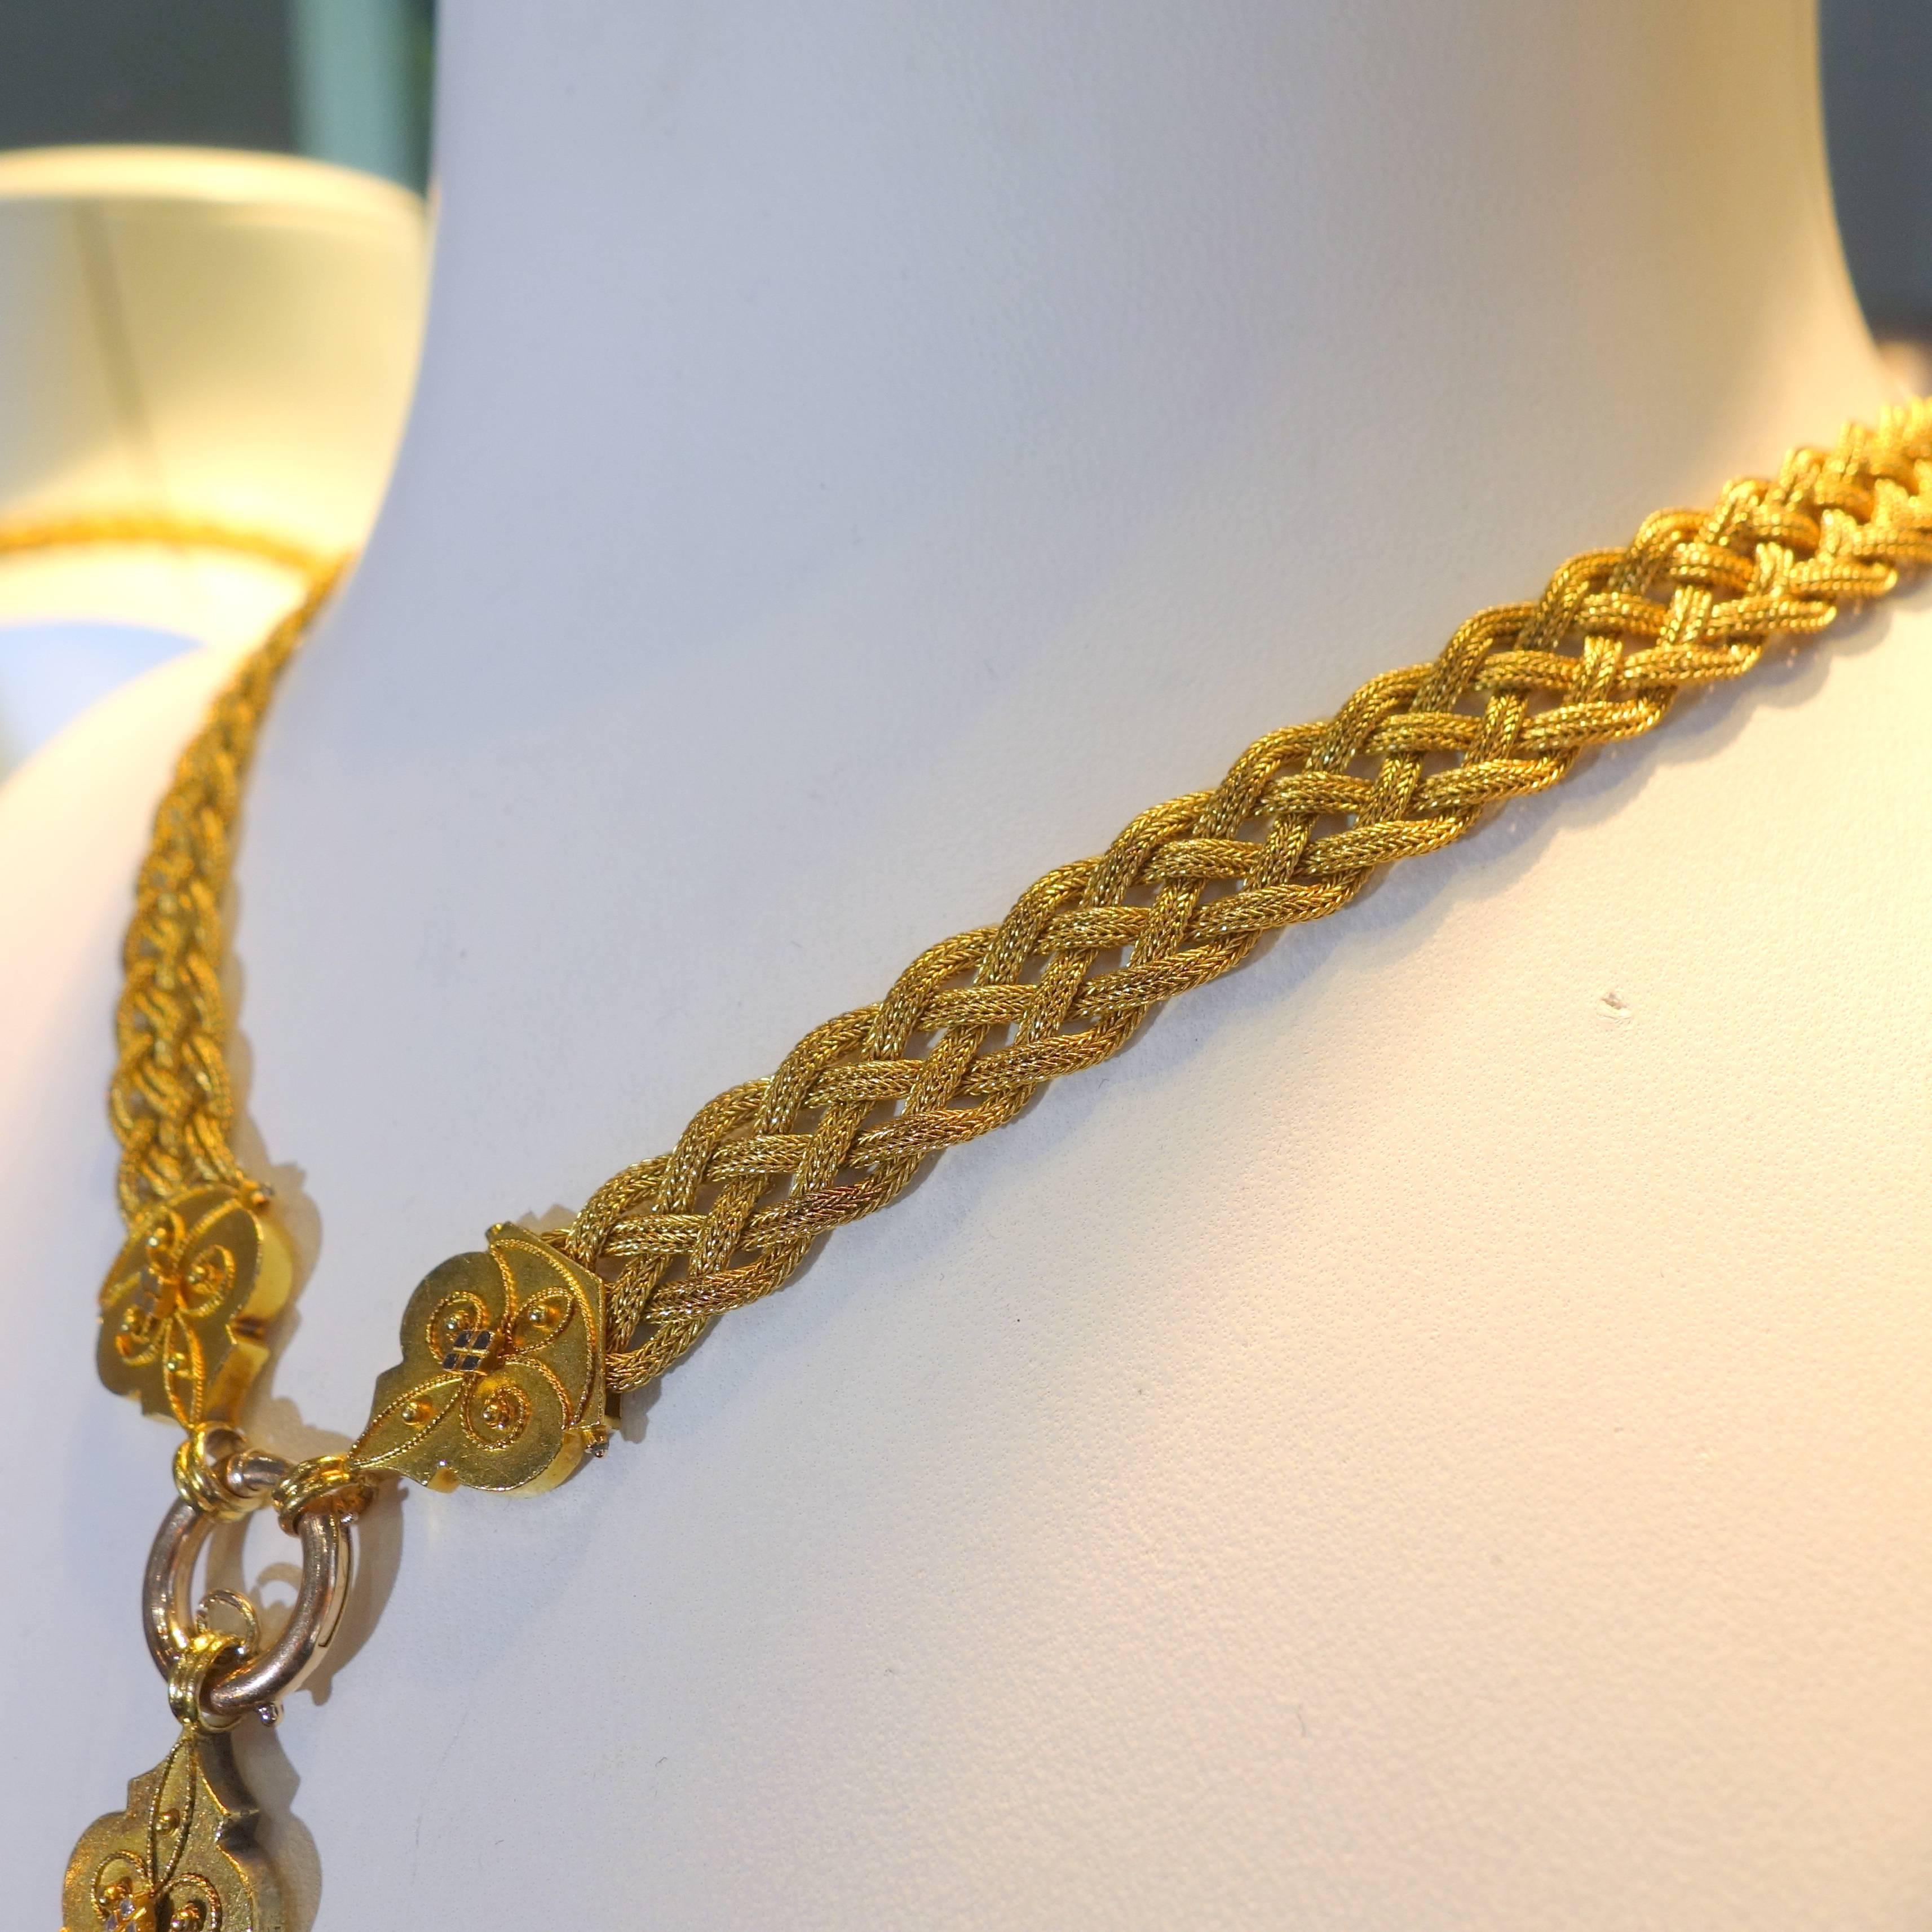 1860s Victorian Braided Gold Necklace and Locket 1